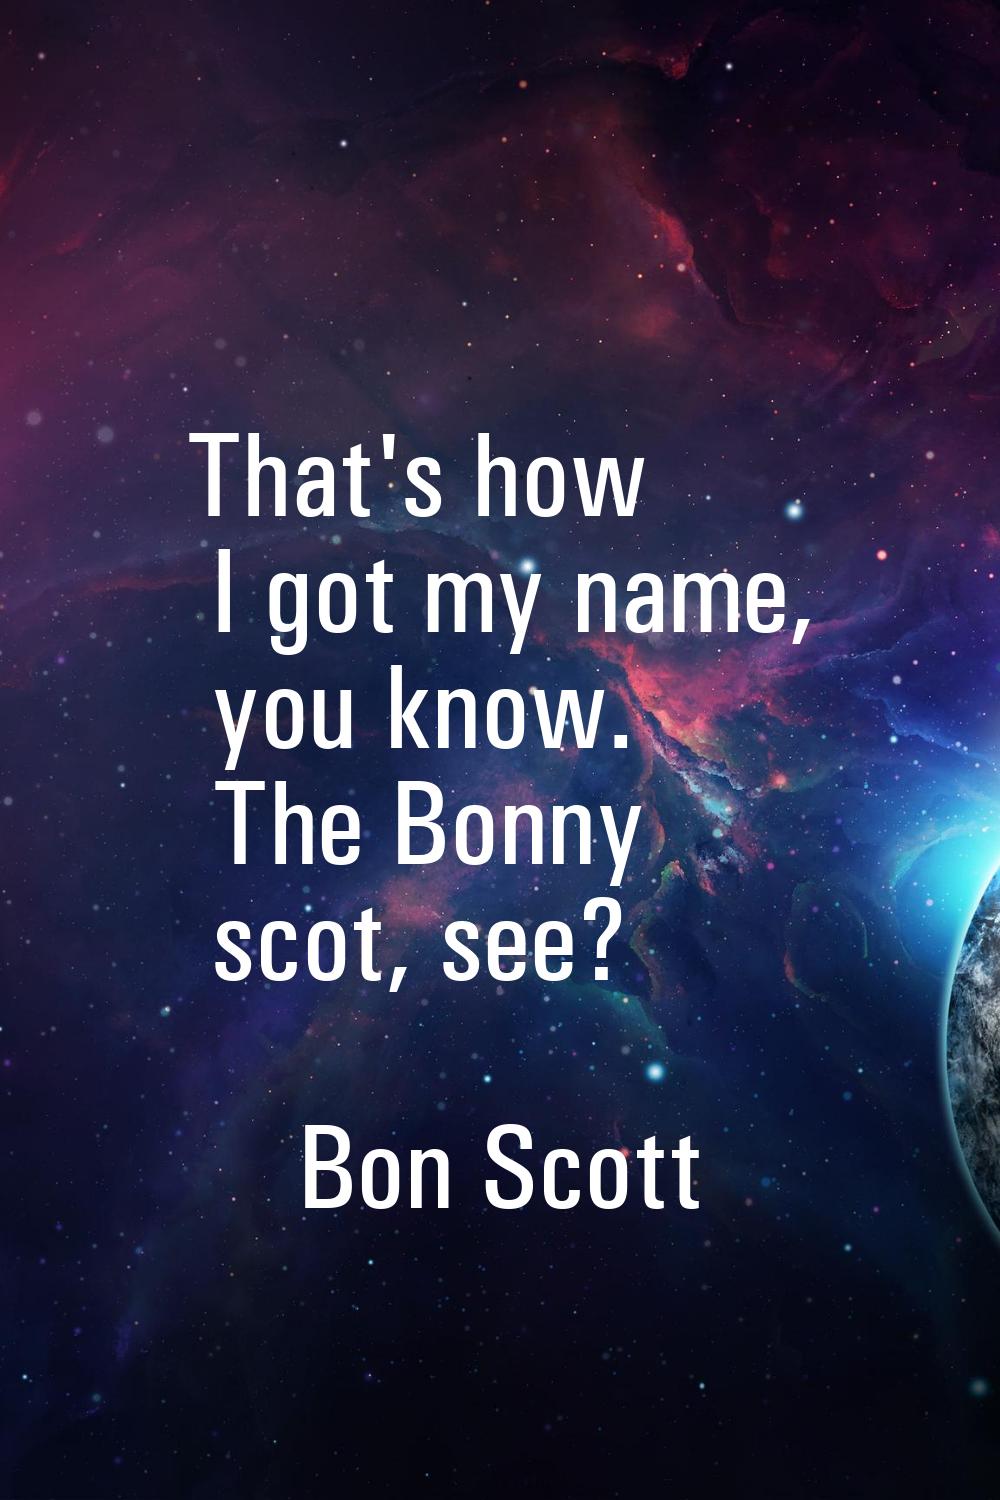 That's how I got my name, you know. The Bonny scot, see?